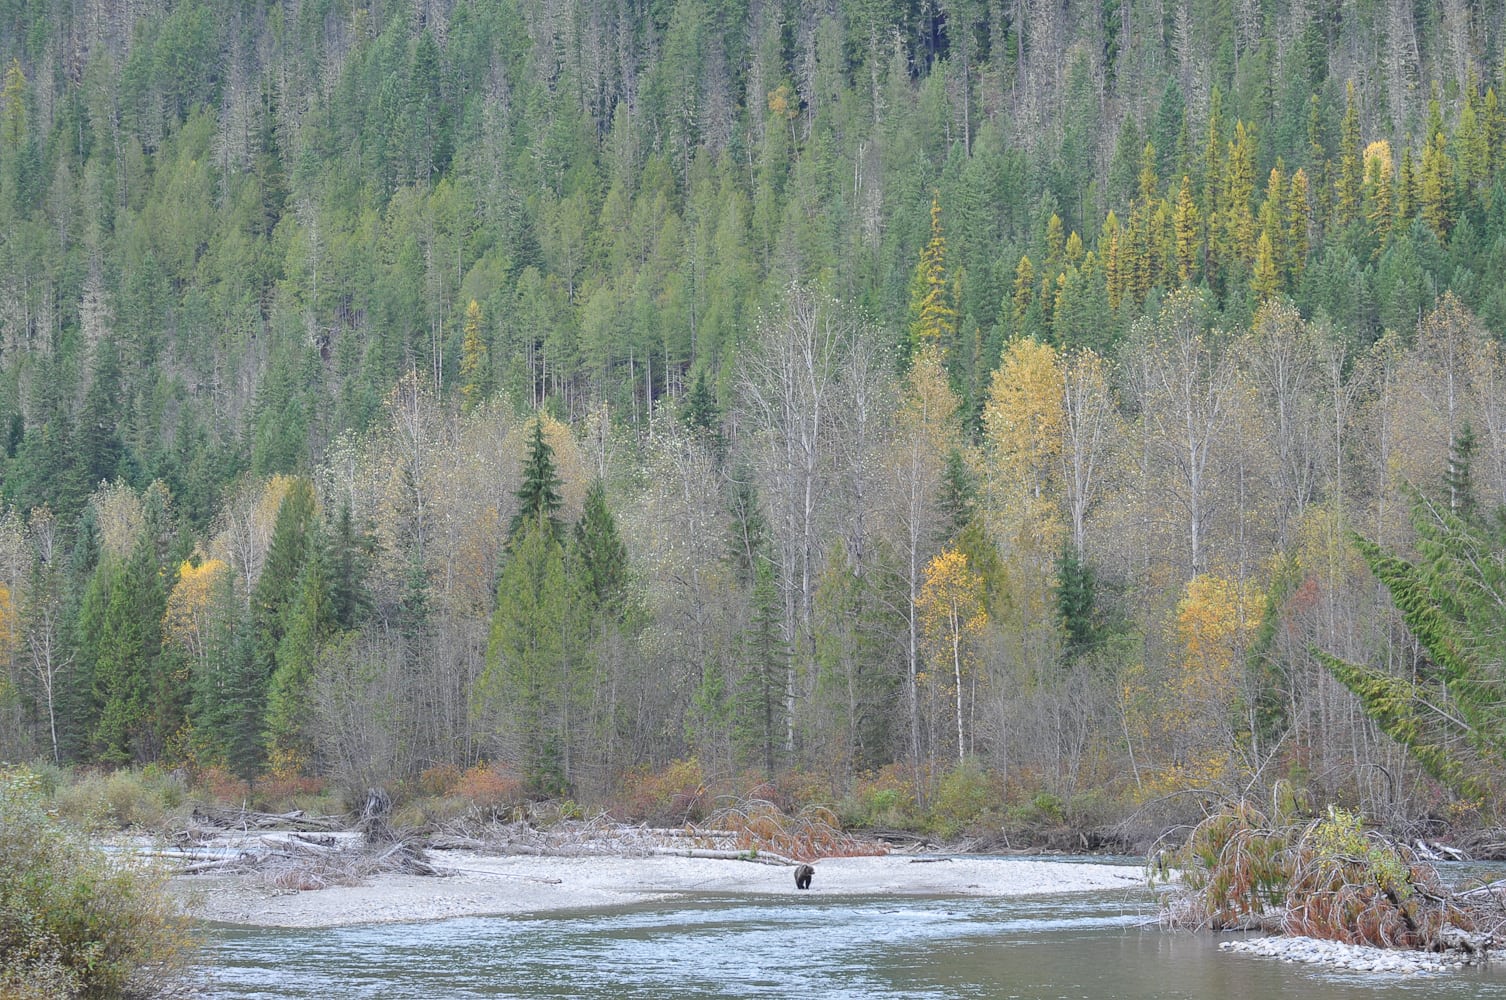 A grizzly on the river at Wild Bear Lodge